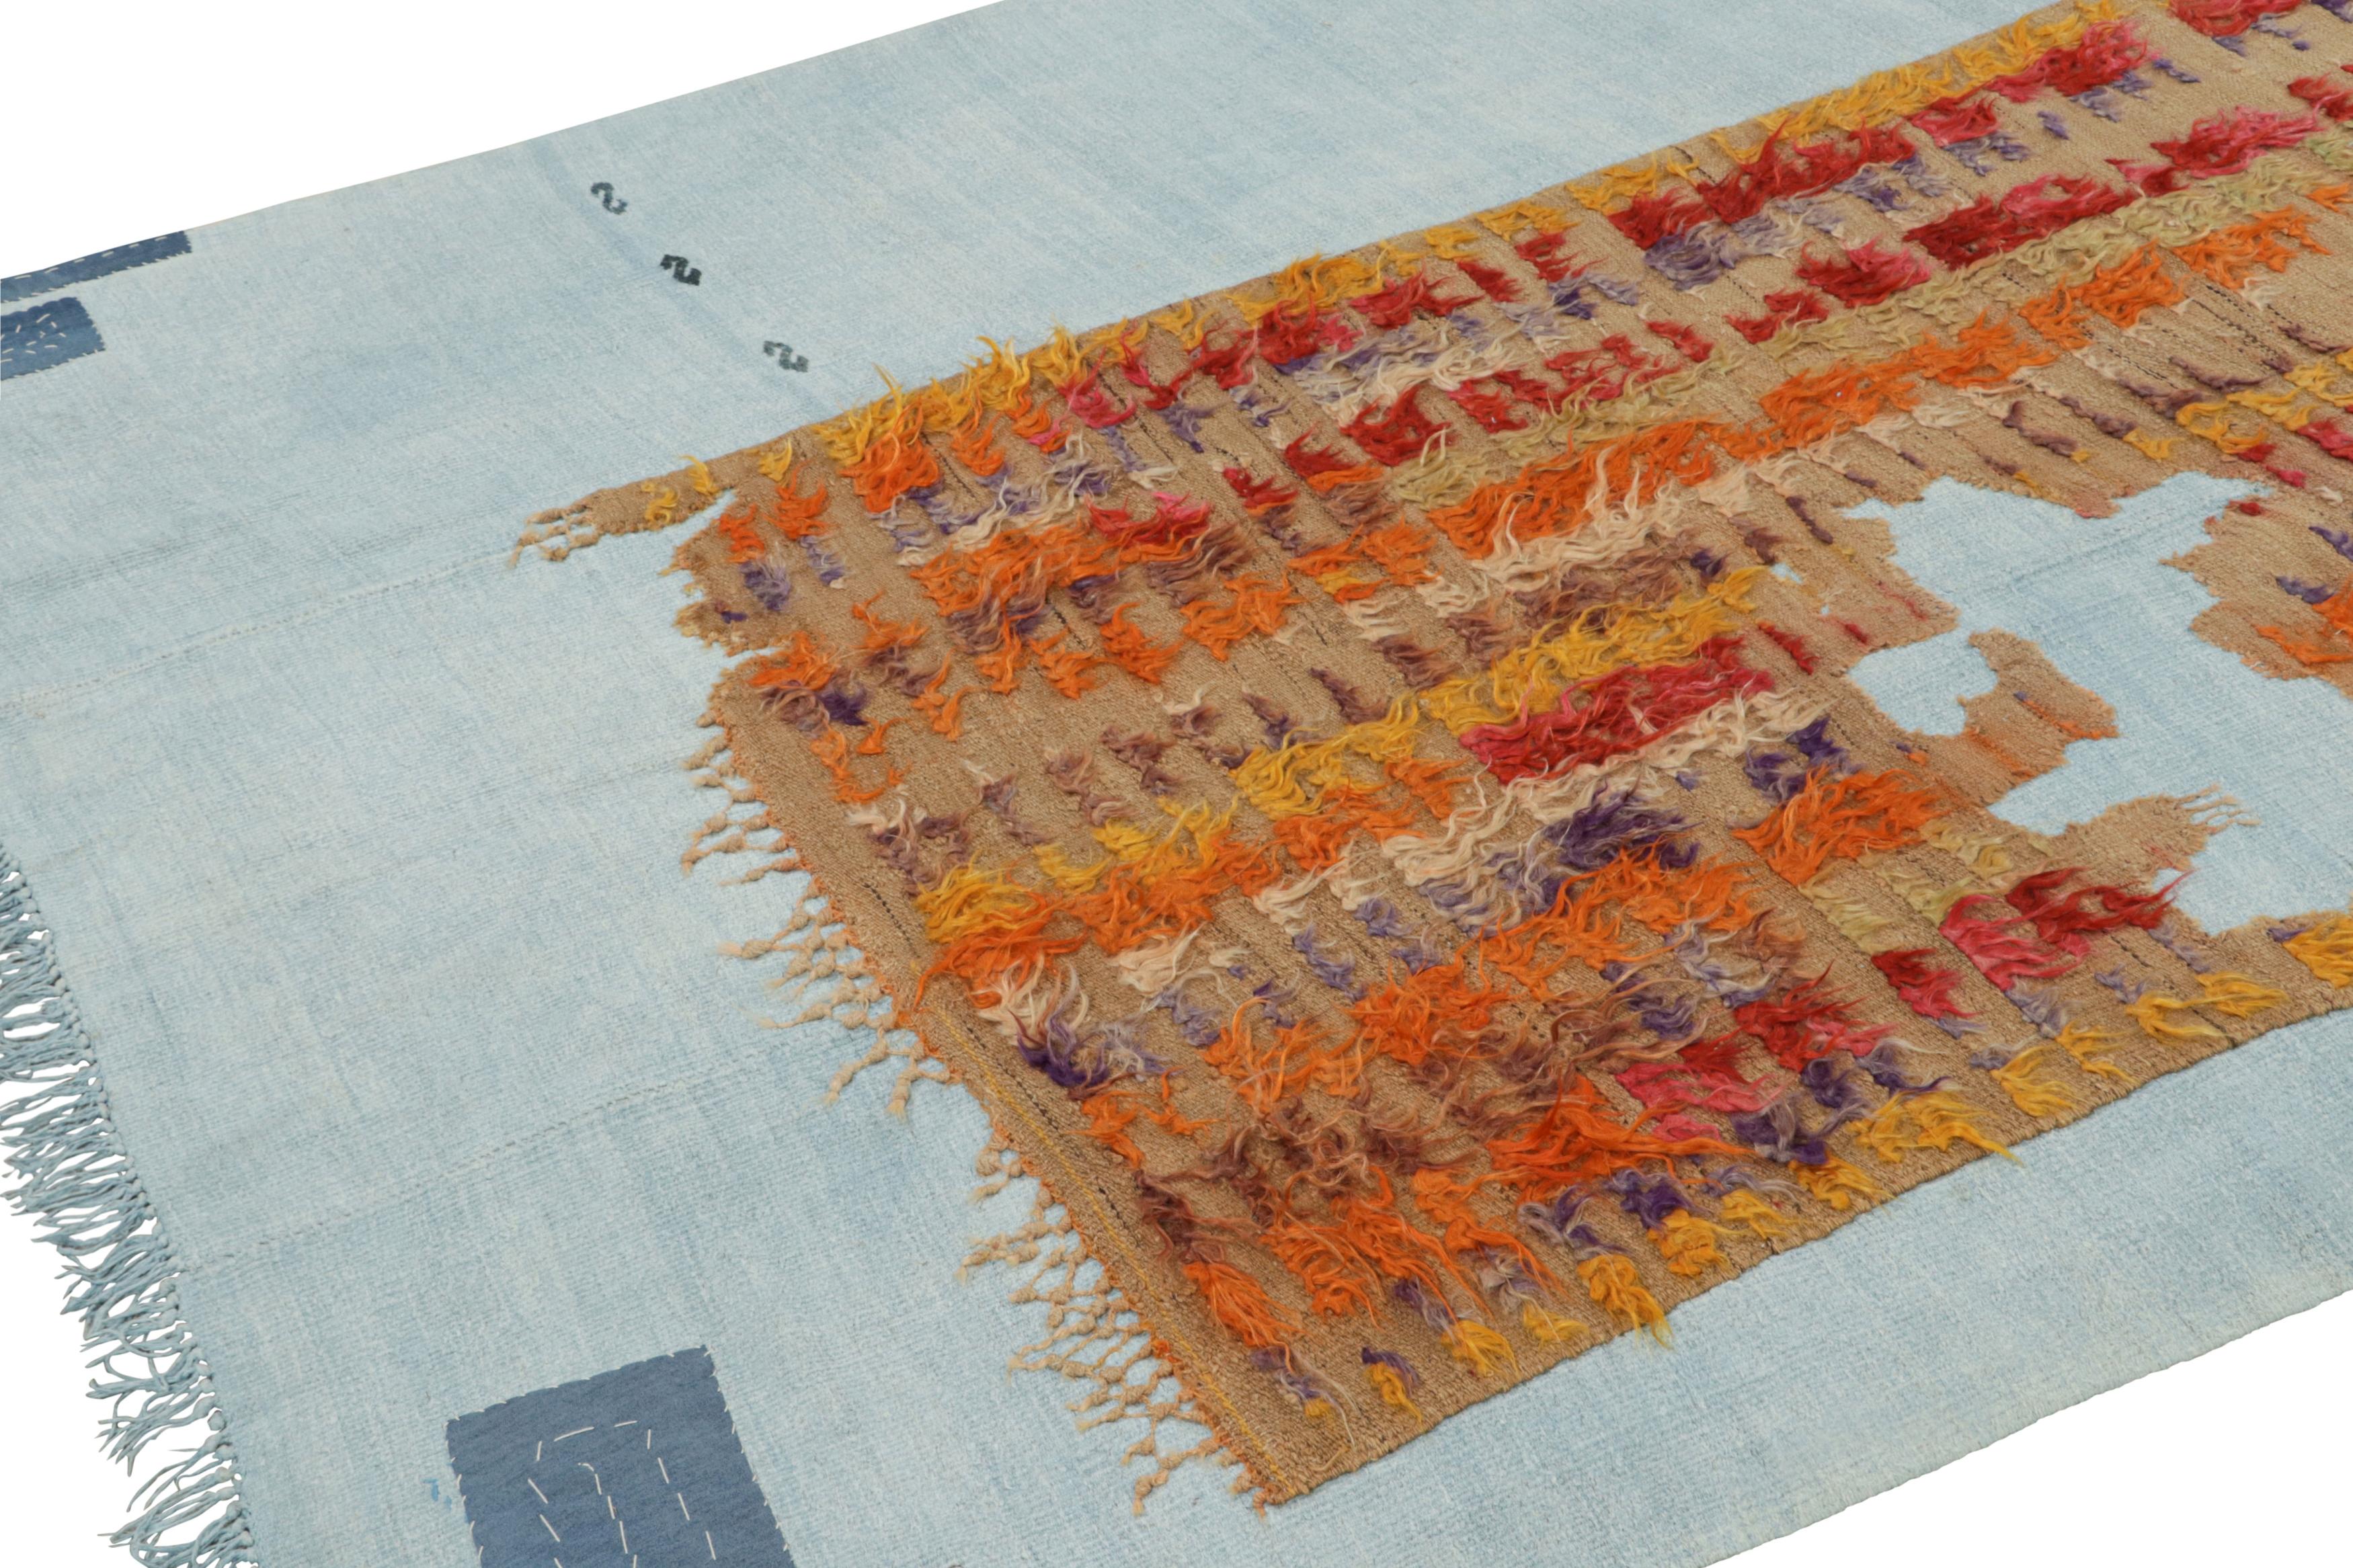 Handwoven in wool originating from Turkey between 1950-1960, this vintage midcentury flat-weave rug represents one of the most visually unique lines to join Rug & Kilim’s collection, a distinct layering of 1950s flatweaves creating a look both